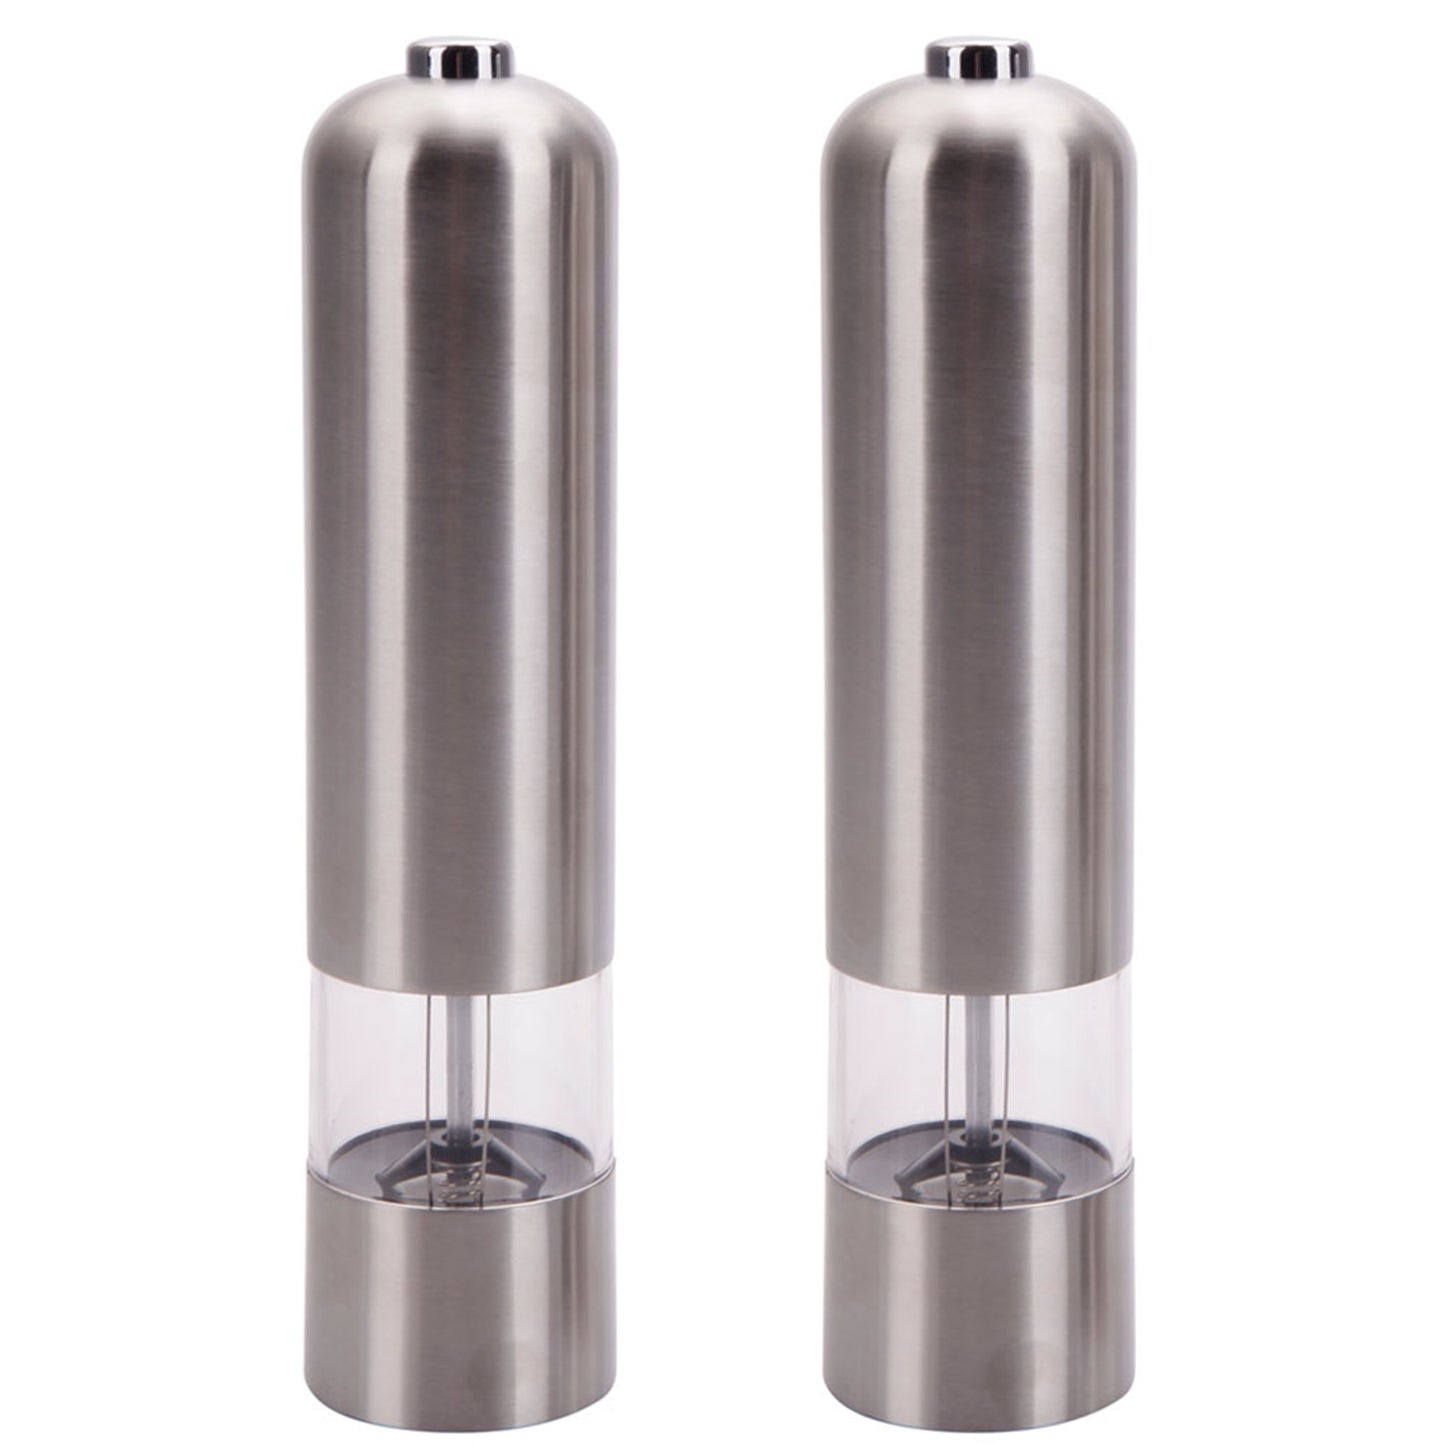 Stainless Steel Electric Automatic Pepper Mills Salt Grinder